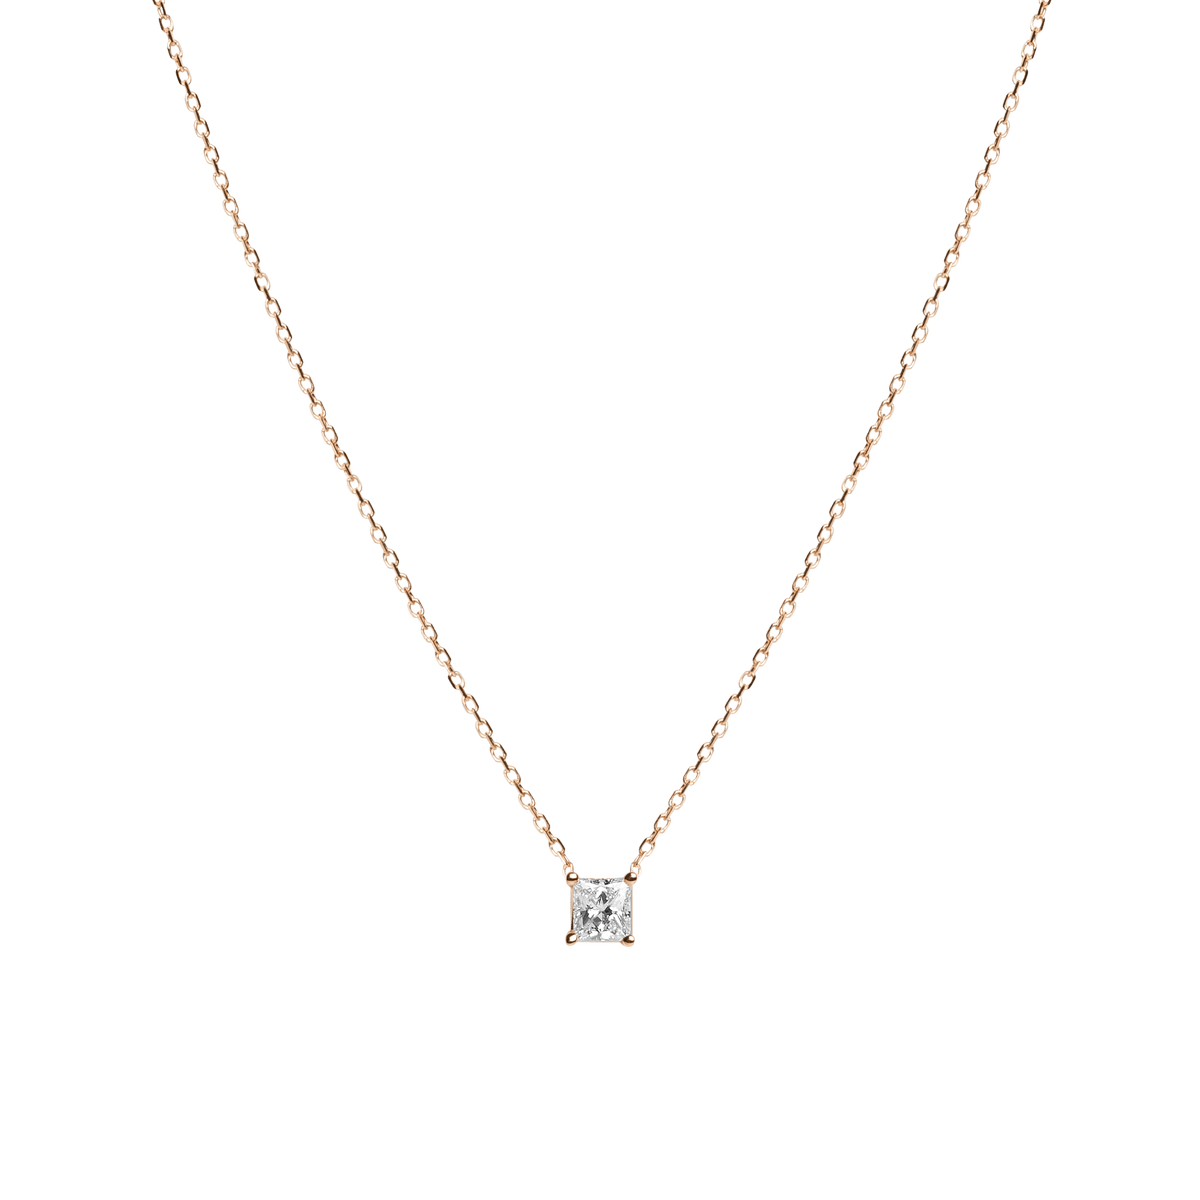 Amazon.com: Ross-Simons 0.15 Carat Bezel-Set Lab-Grown Diamond Necklace in  Sterling Silver. 16 inches: Clothing, Shoes & Jewelry